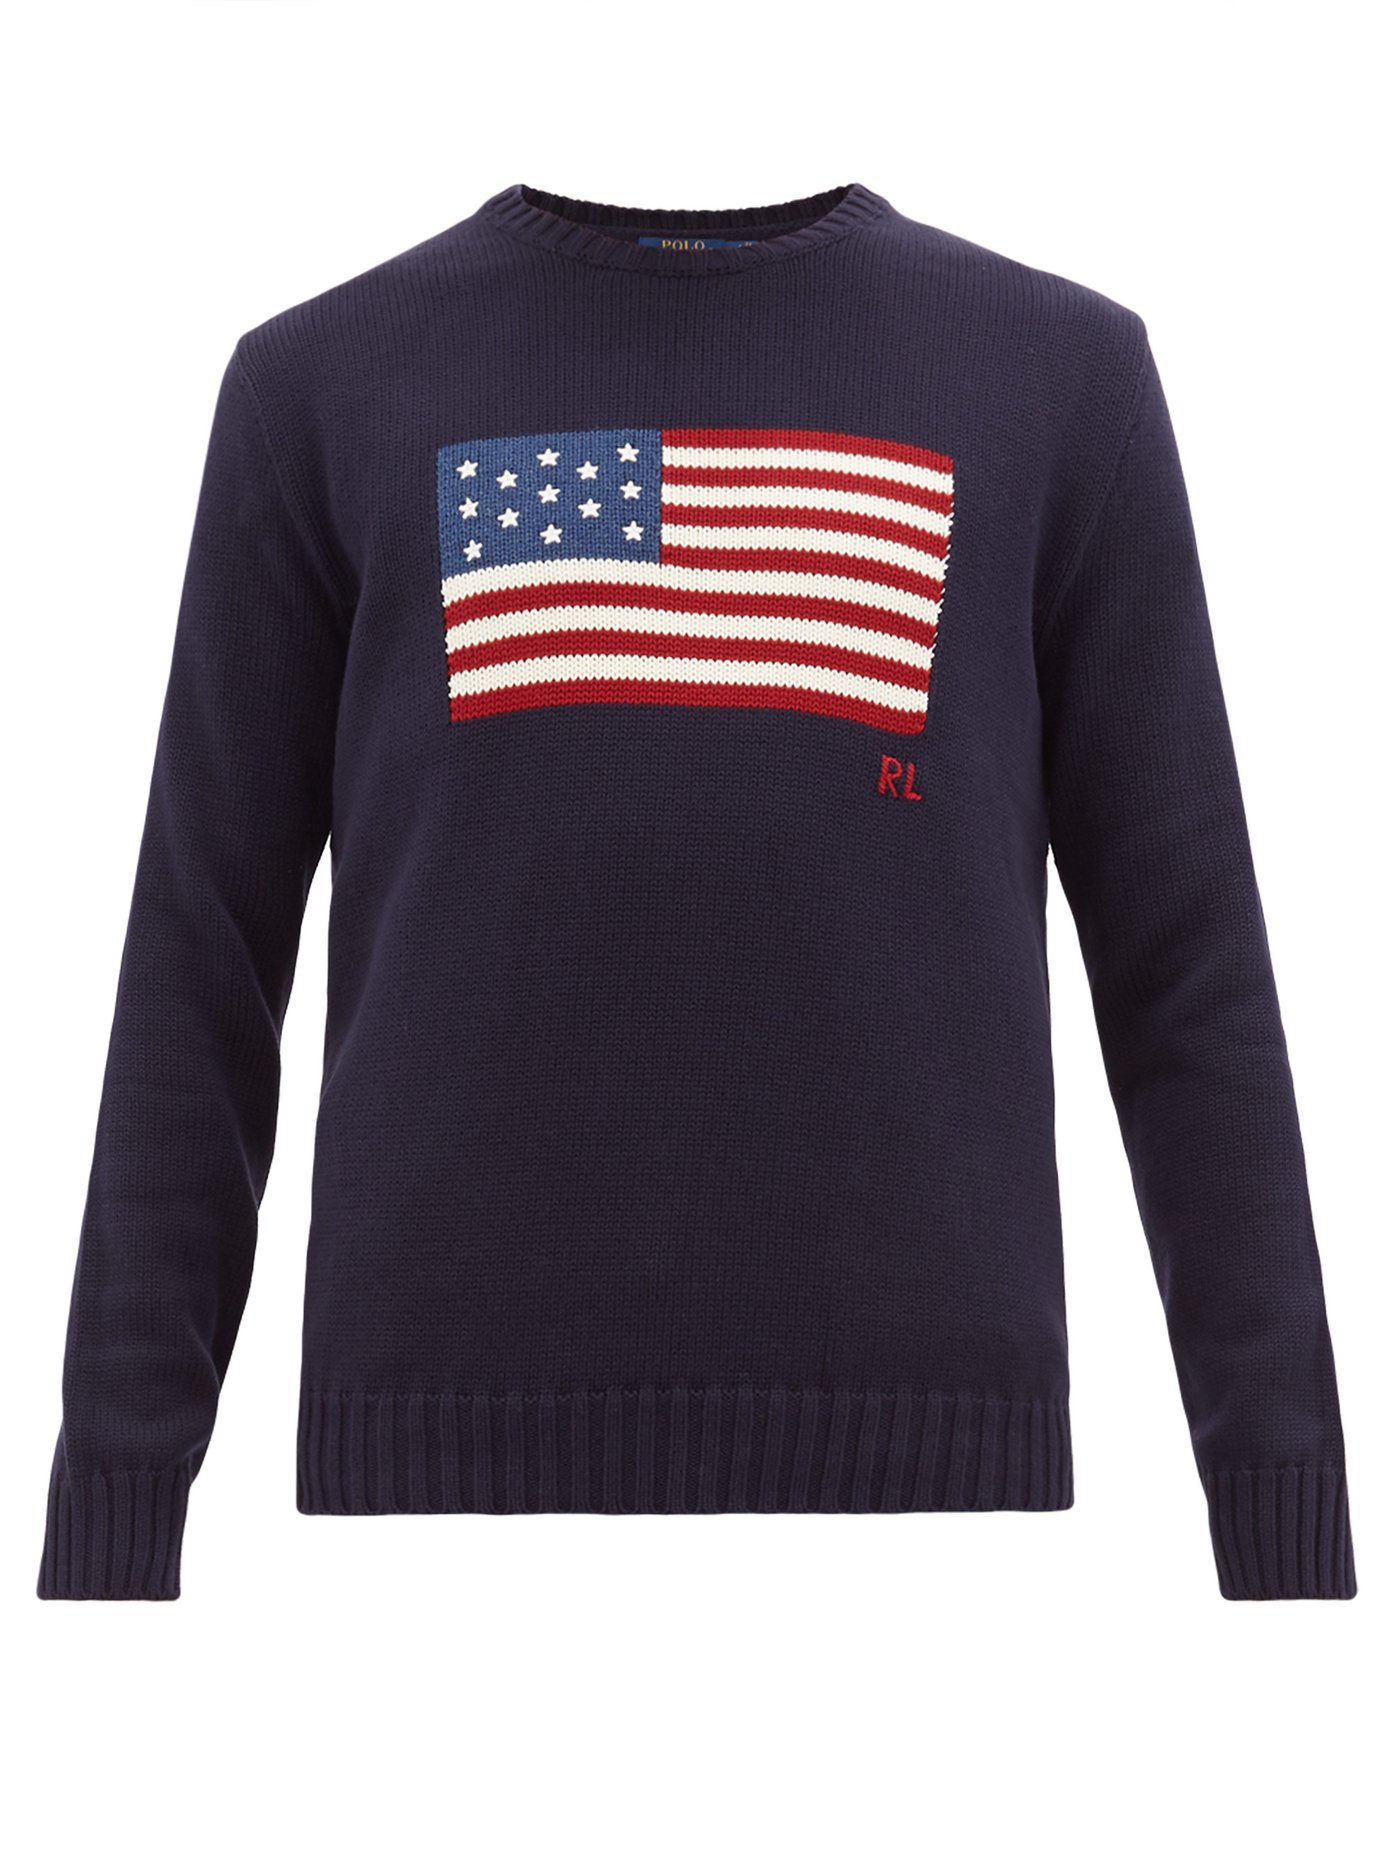 polo american flag sweater